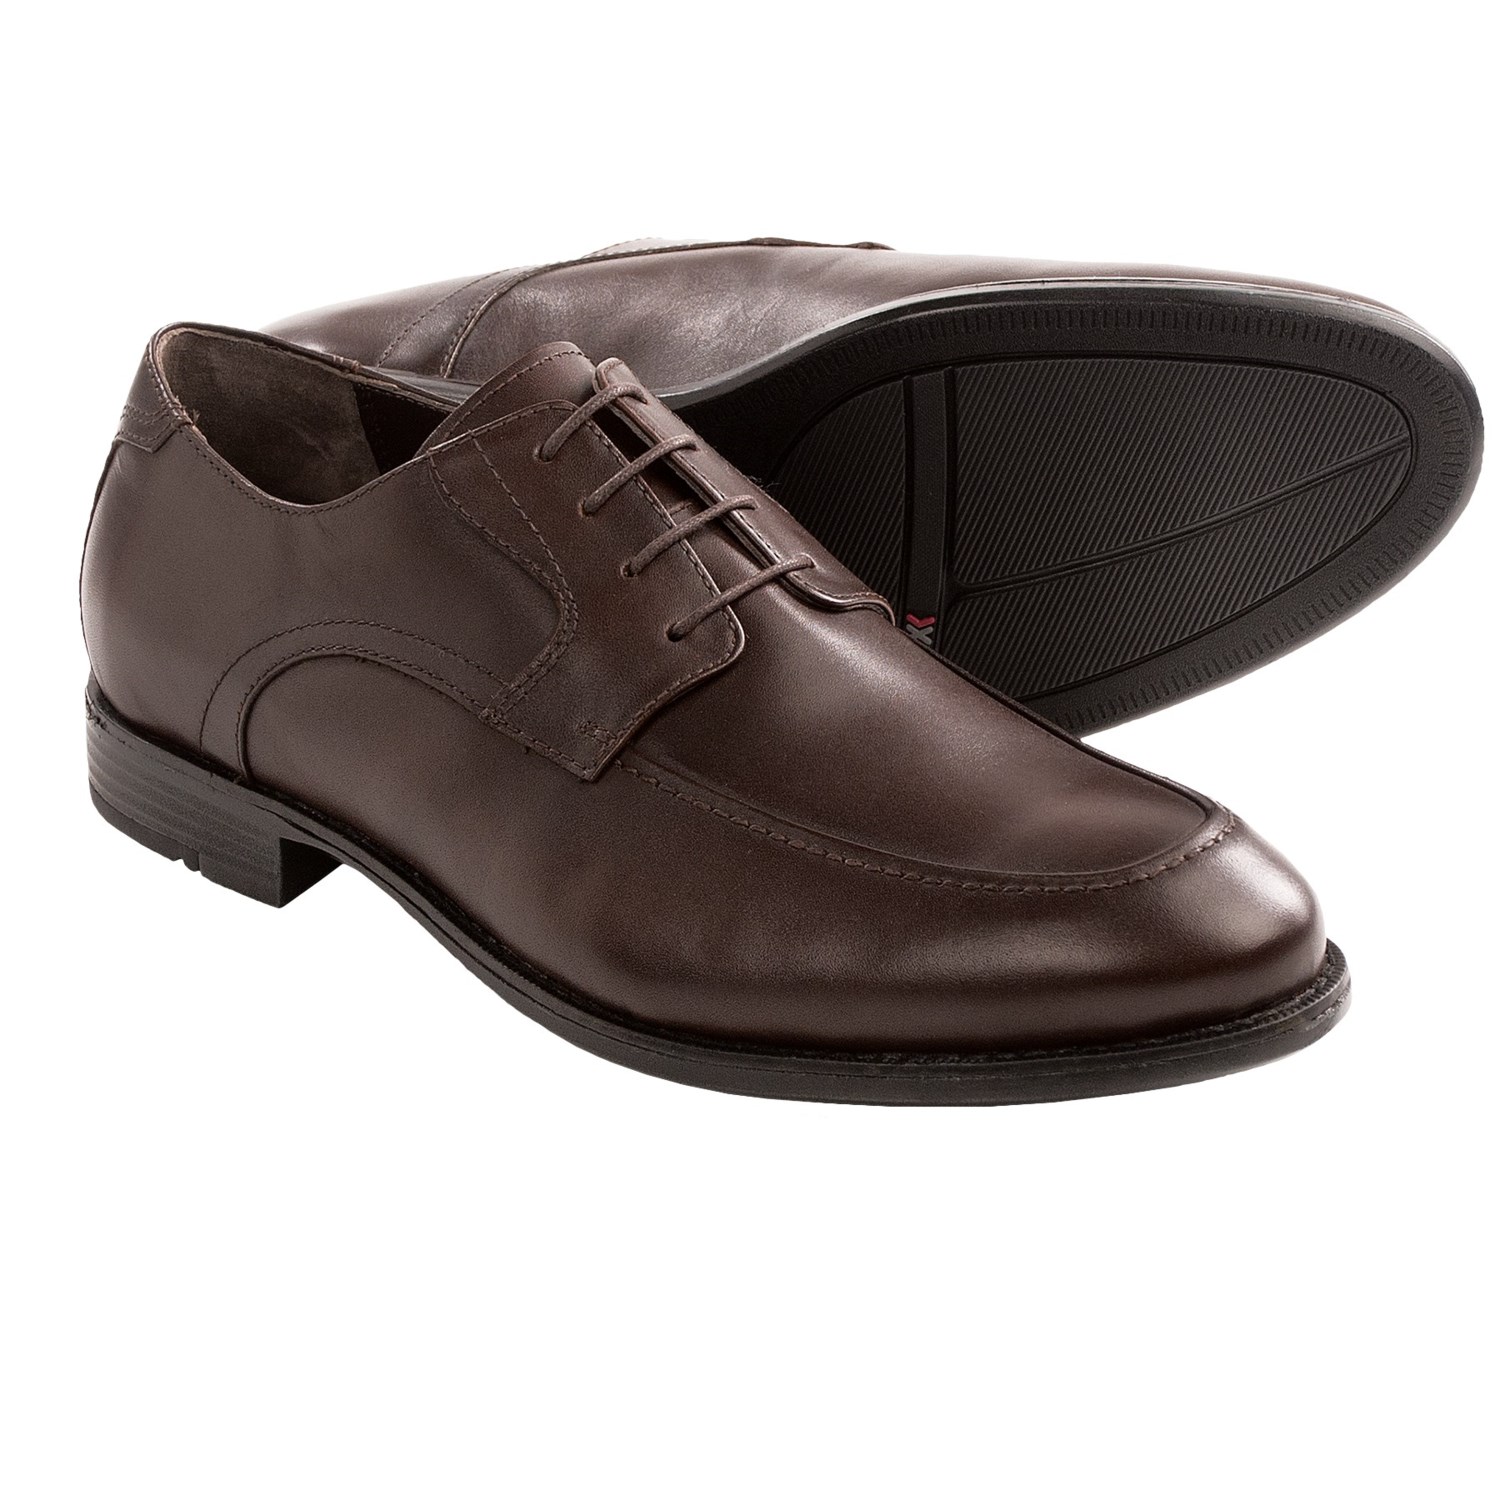 johnston-and-murphy-russell-shoes-leather-moc-toe-lace-ups-for-men-in ...